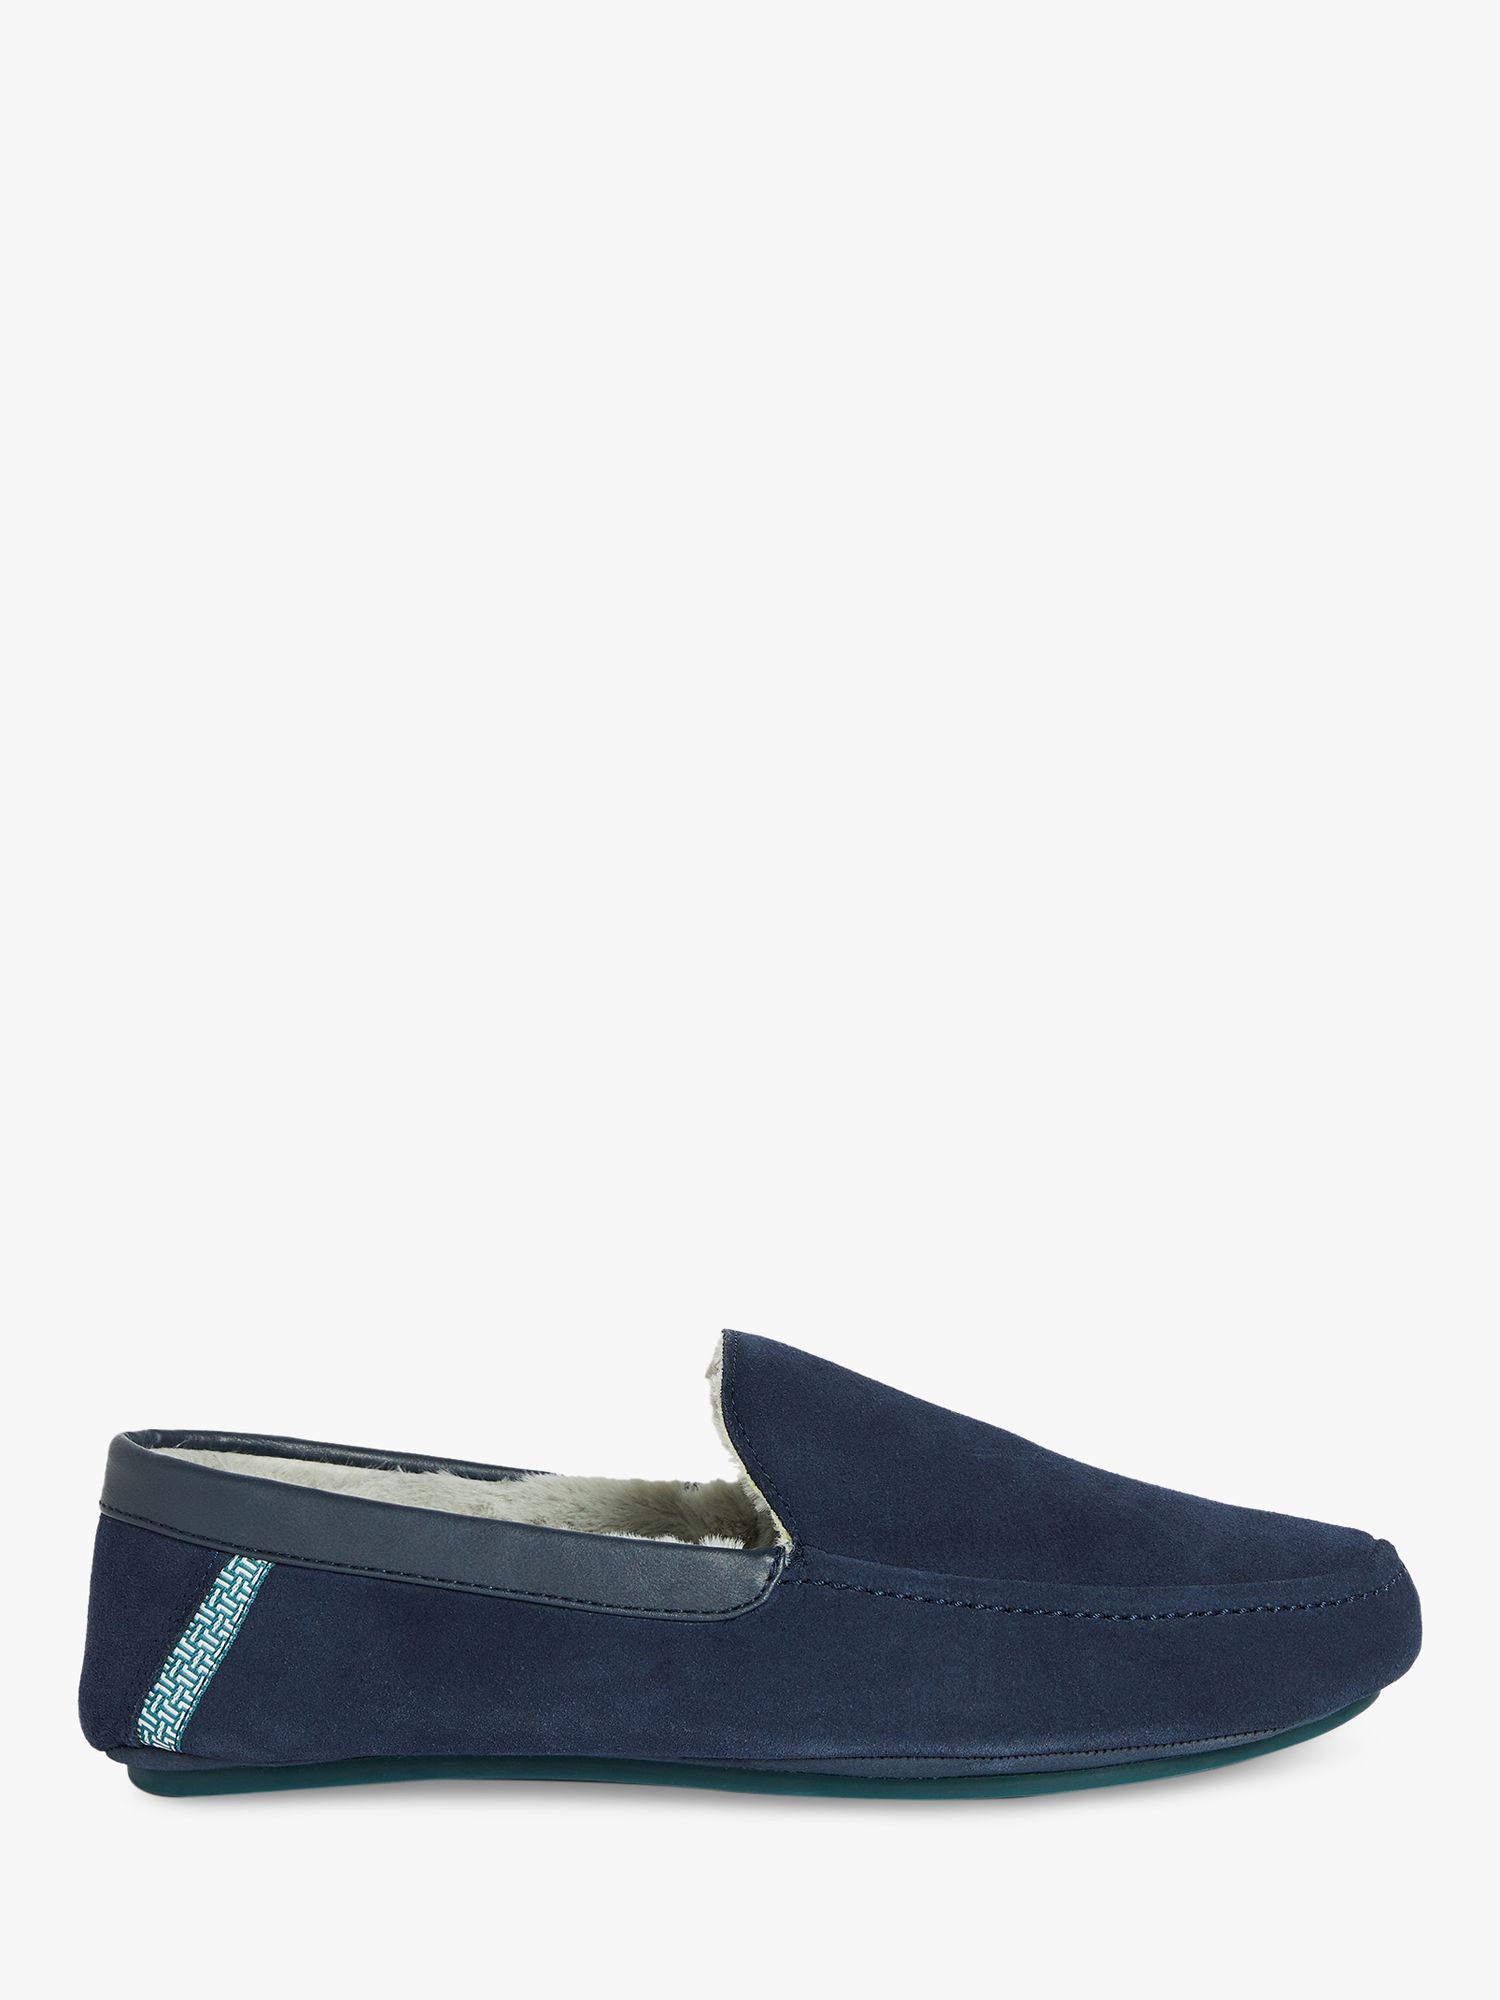 Ted Baker Valant Moccasin Slippers, Navy